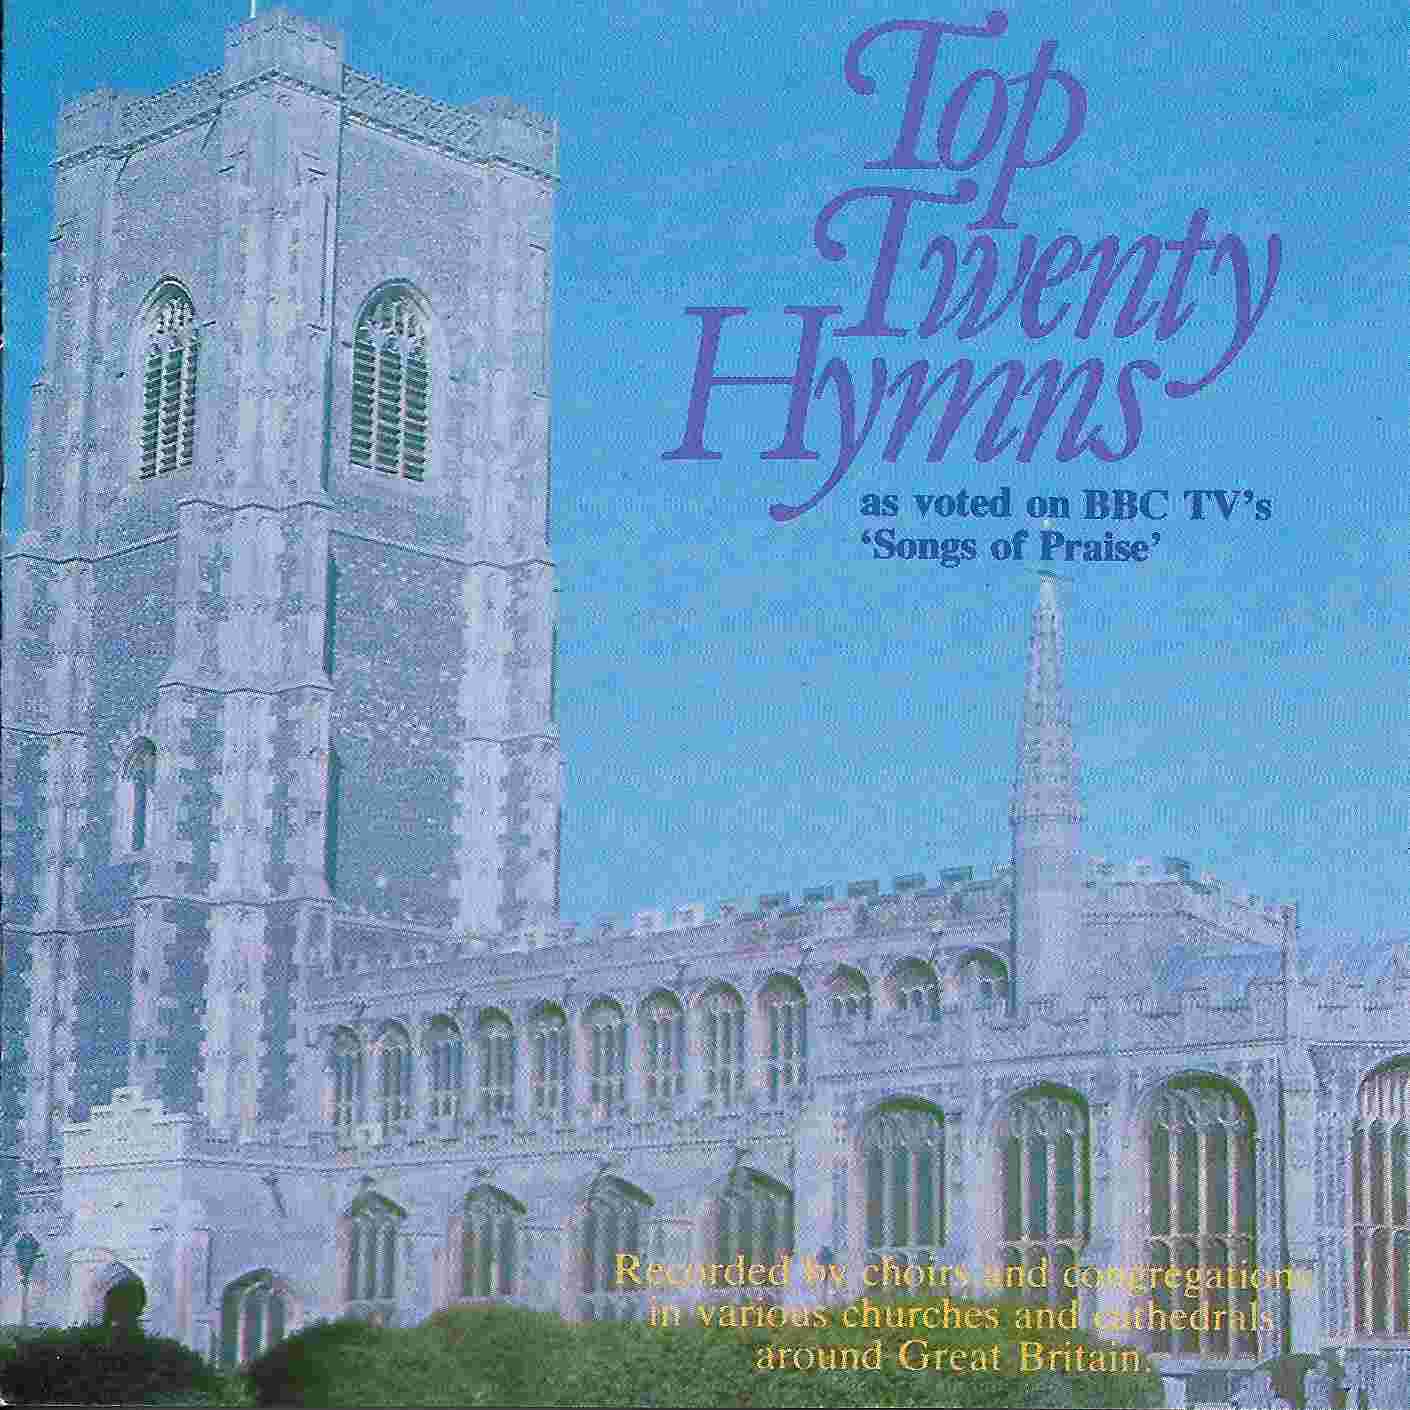 Picture of BBCCD579 Top twenty hymns by artist Various from the BBC cds - Records and Tapes library